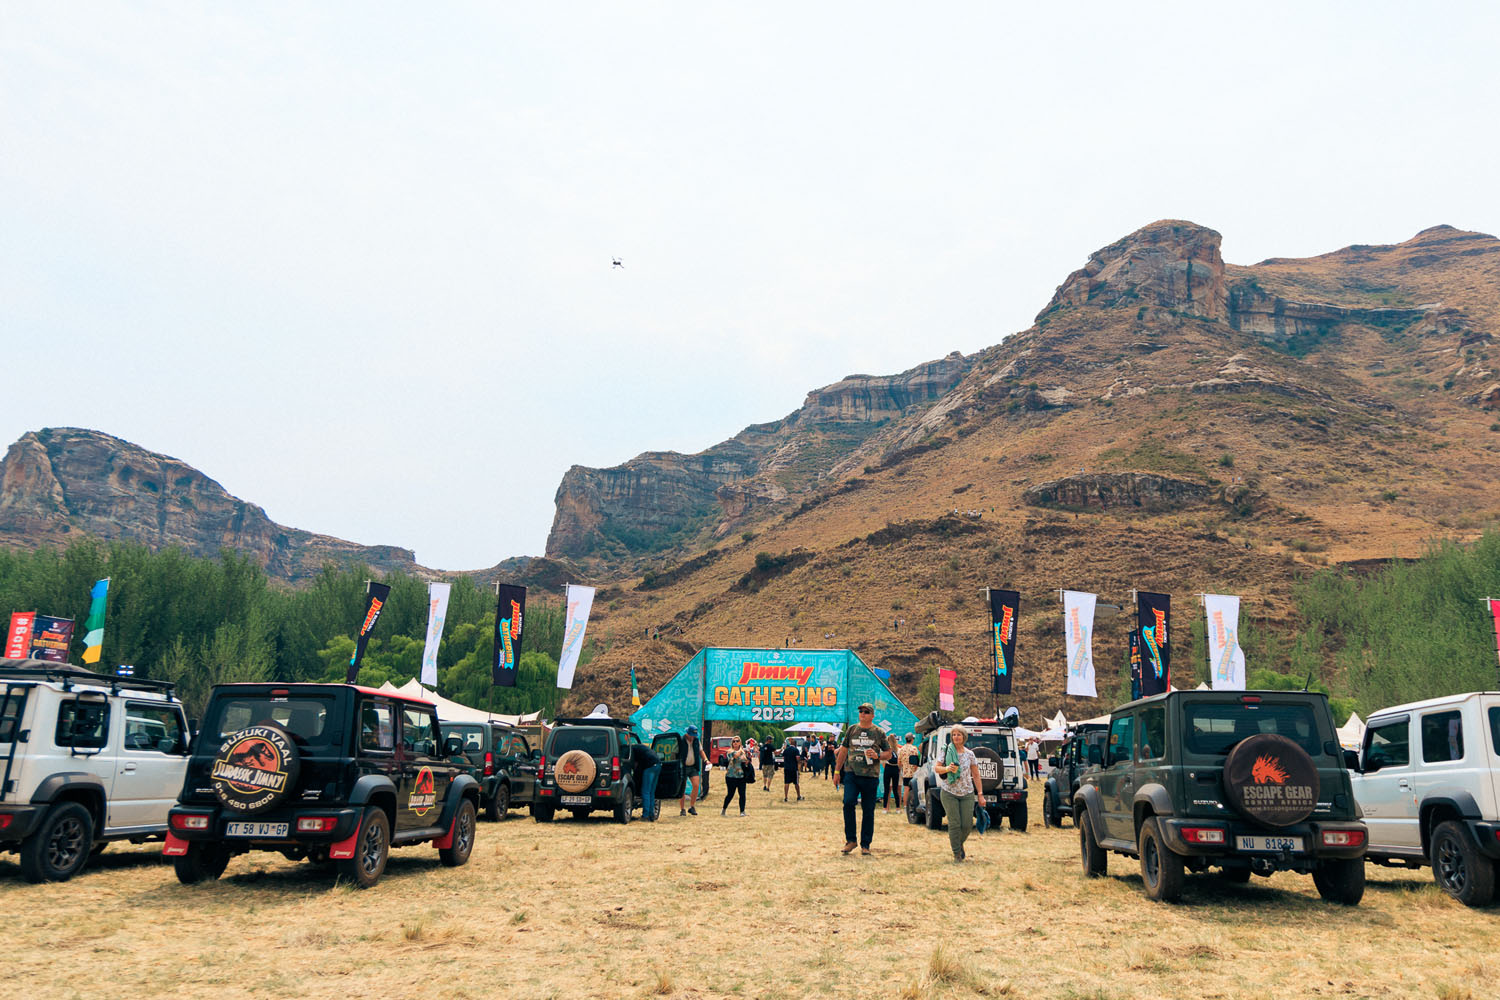 suzuki, suzuki jimny, suzuki jimny 5-door, suzuki sets a new world record in south africa